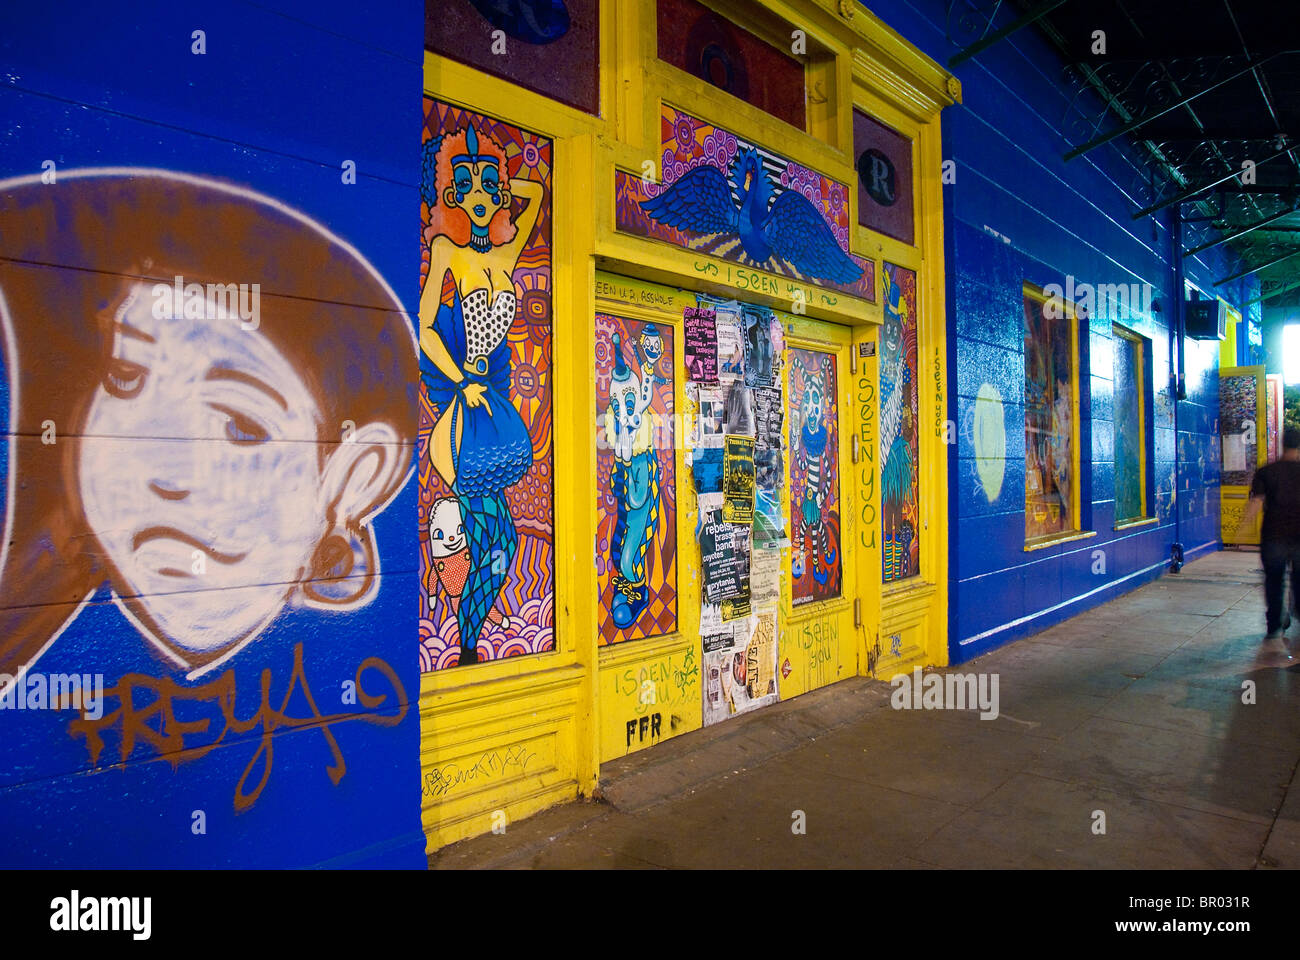 Wall art on Frenchmen Street, near the French Quarter in New Orleans, Louisiana, USA Stock Photo